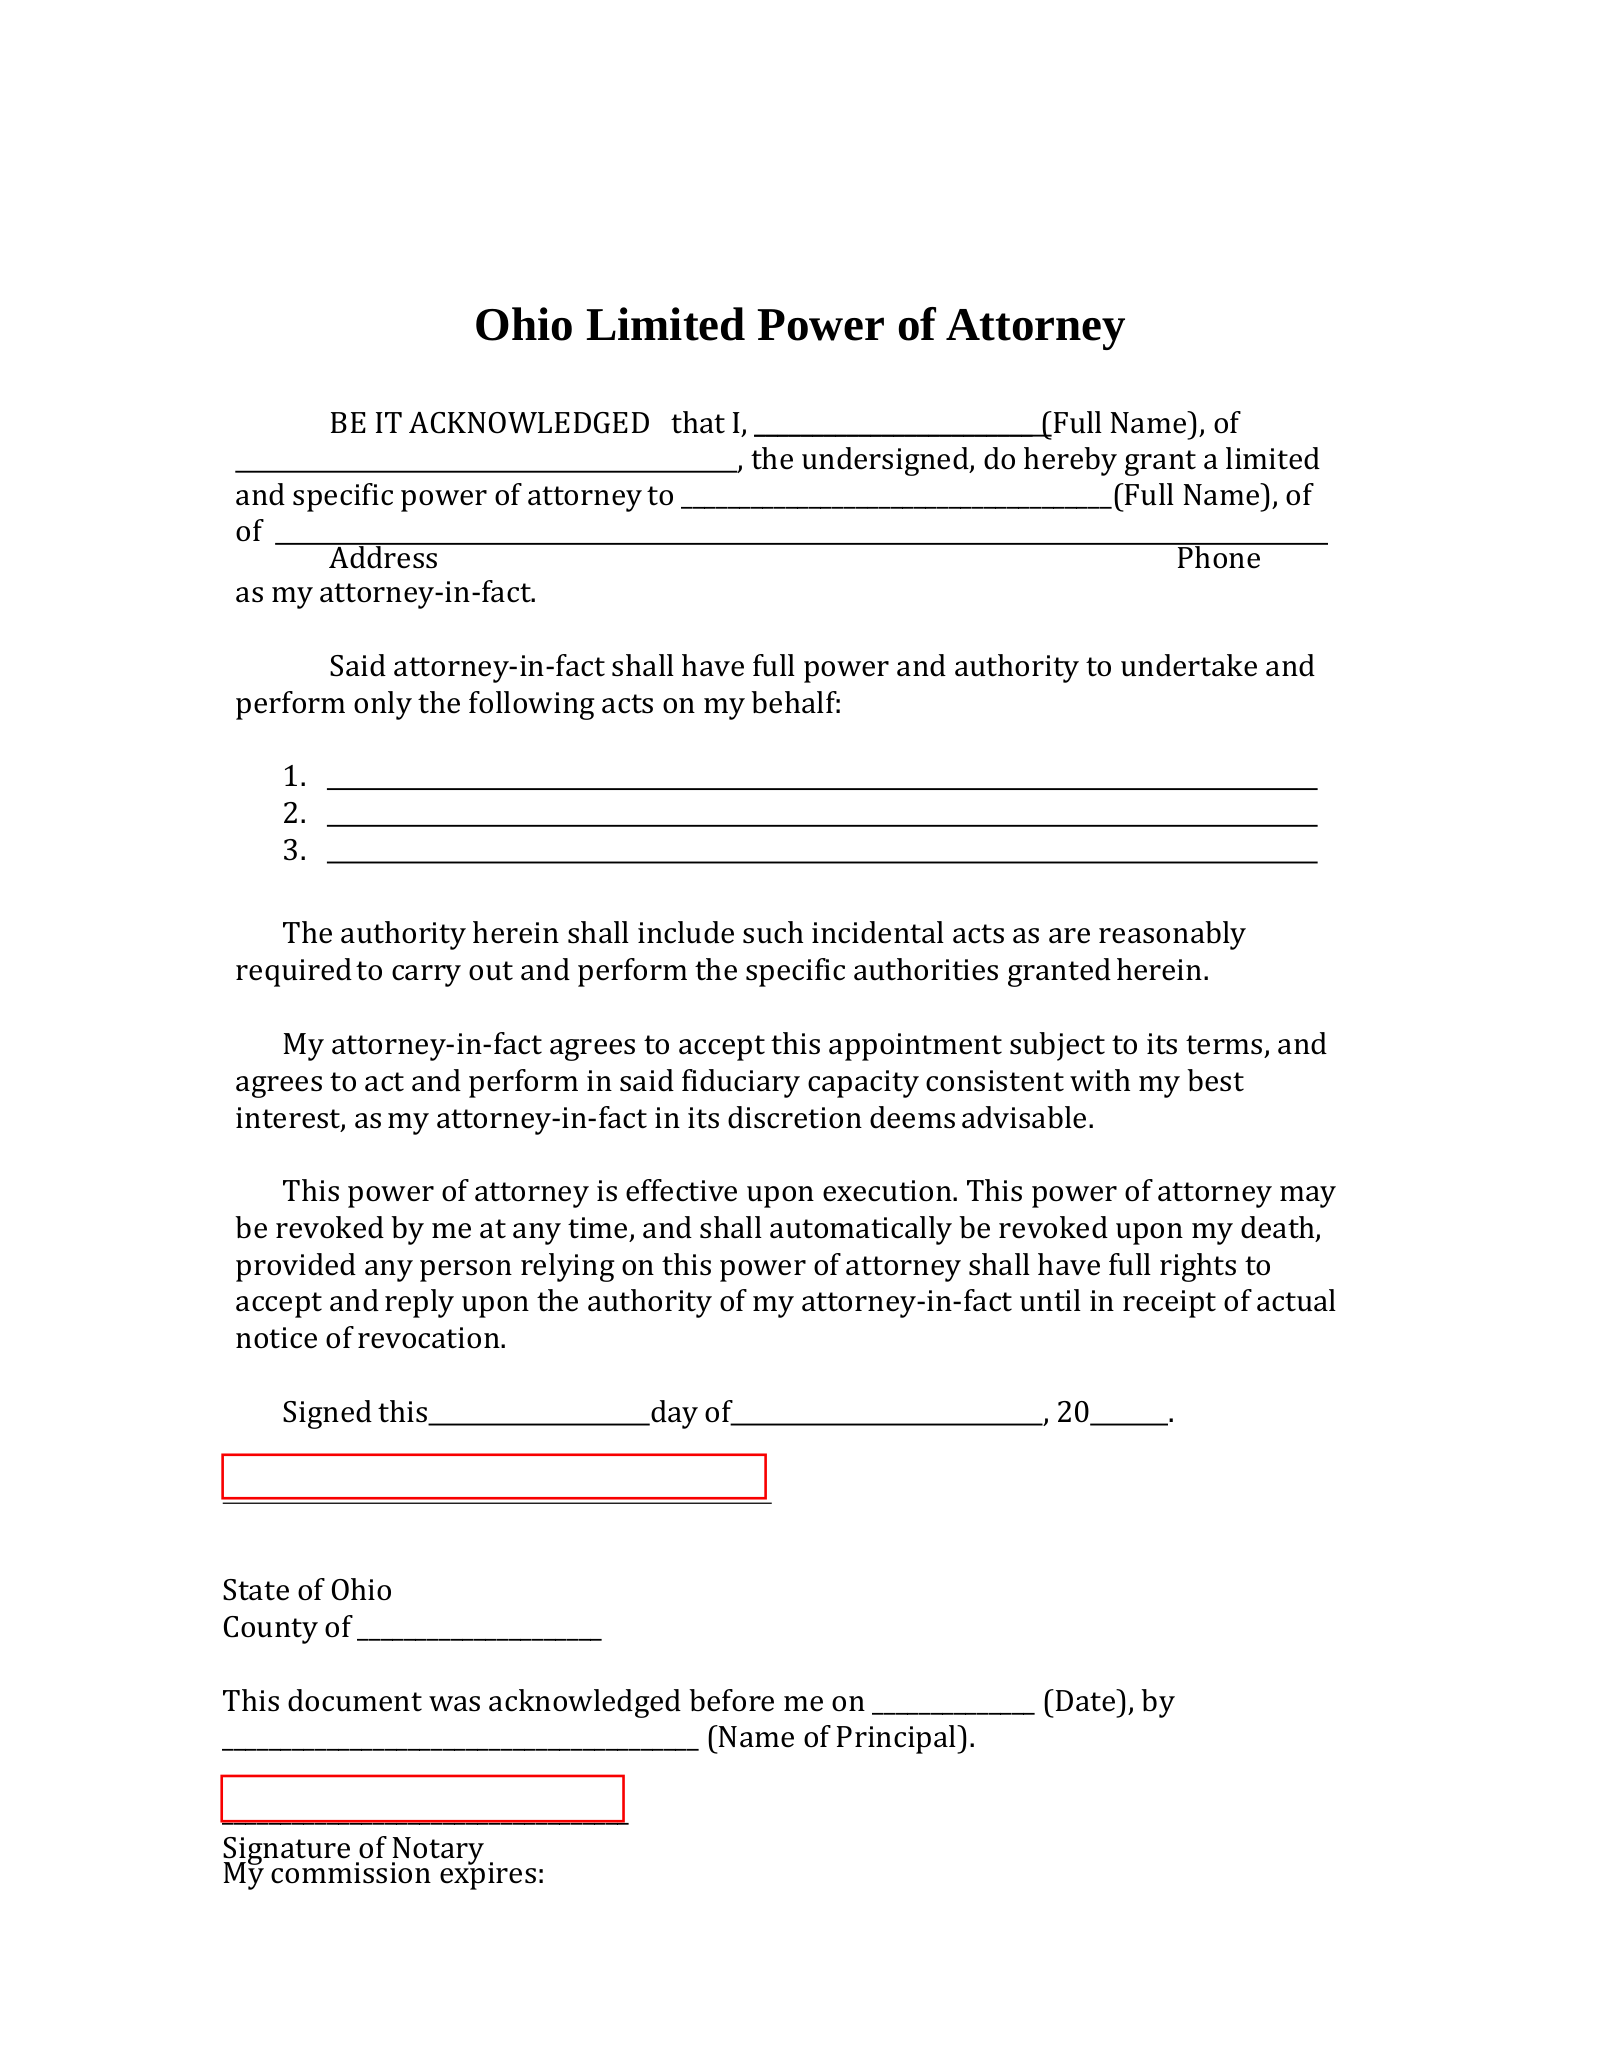 Ohio Limited Power of Attorney